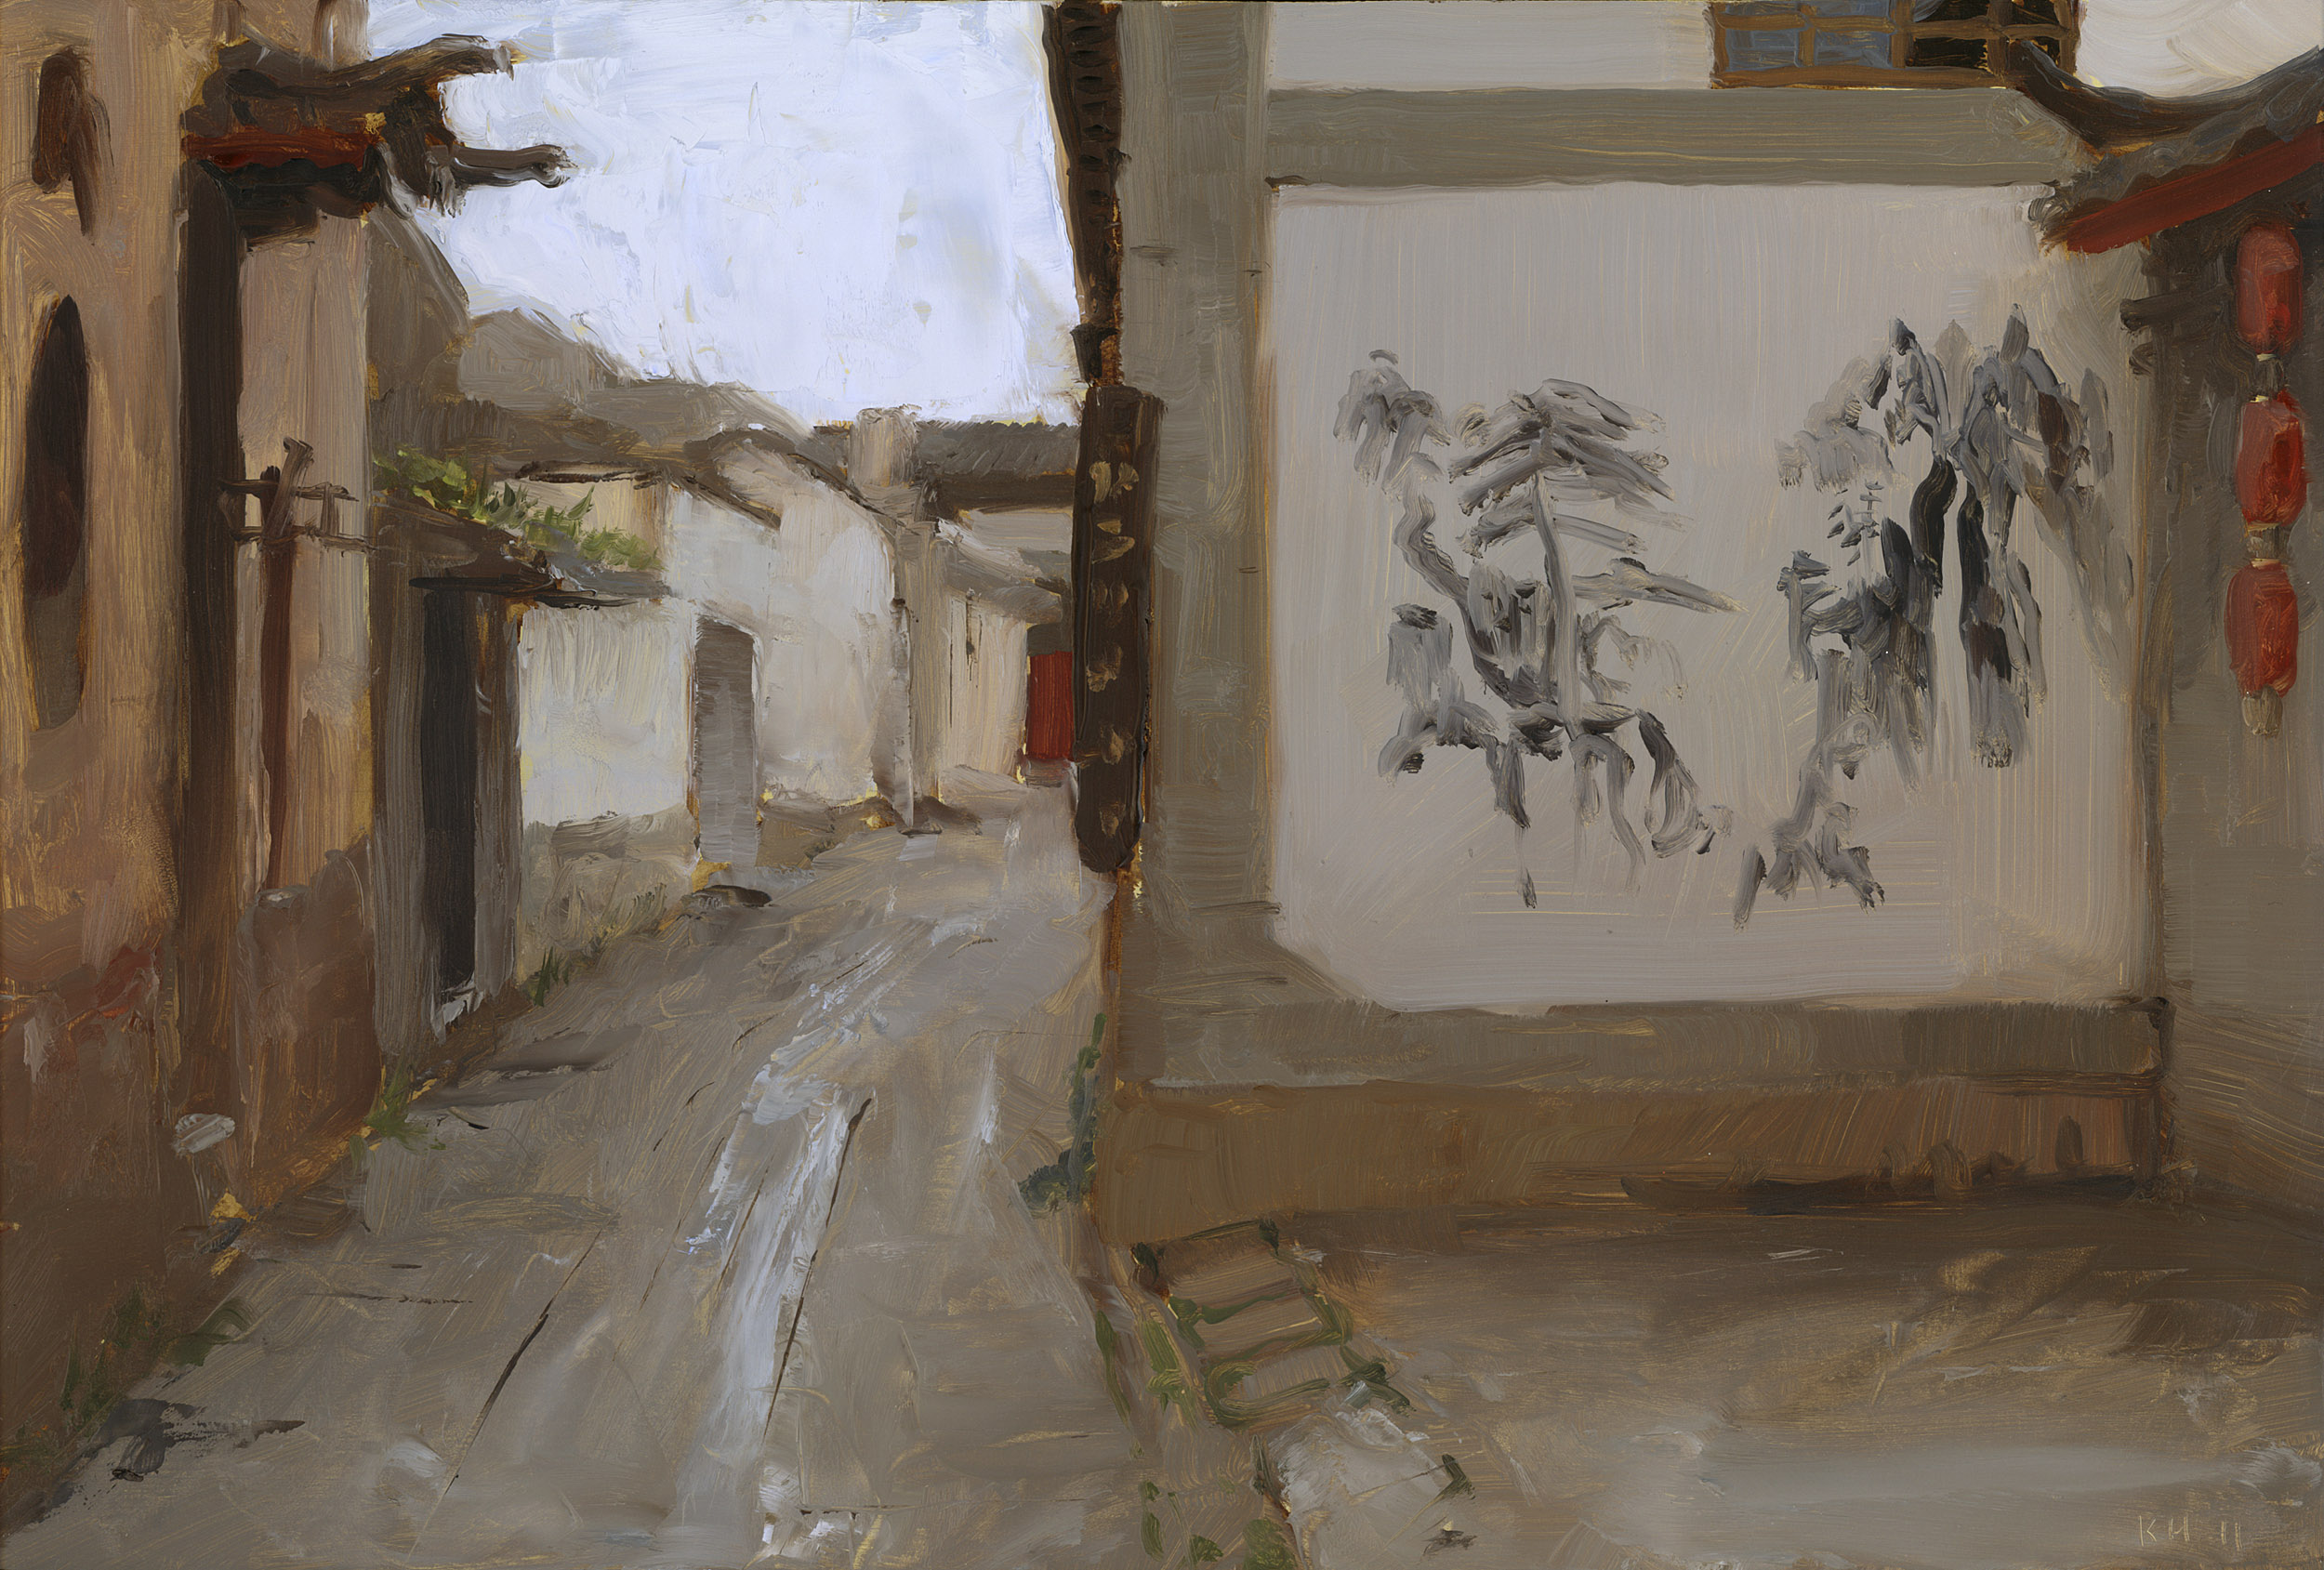 plein air painting Study for "Lijiang" 